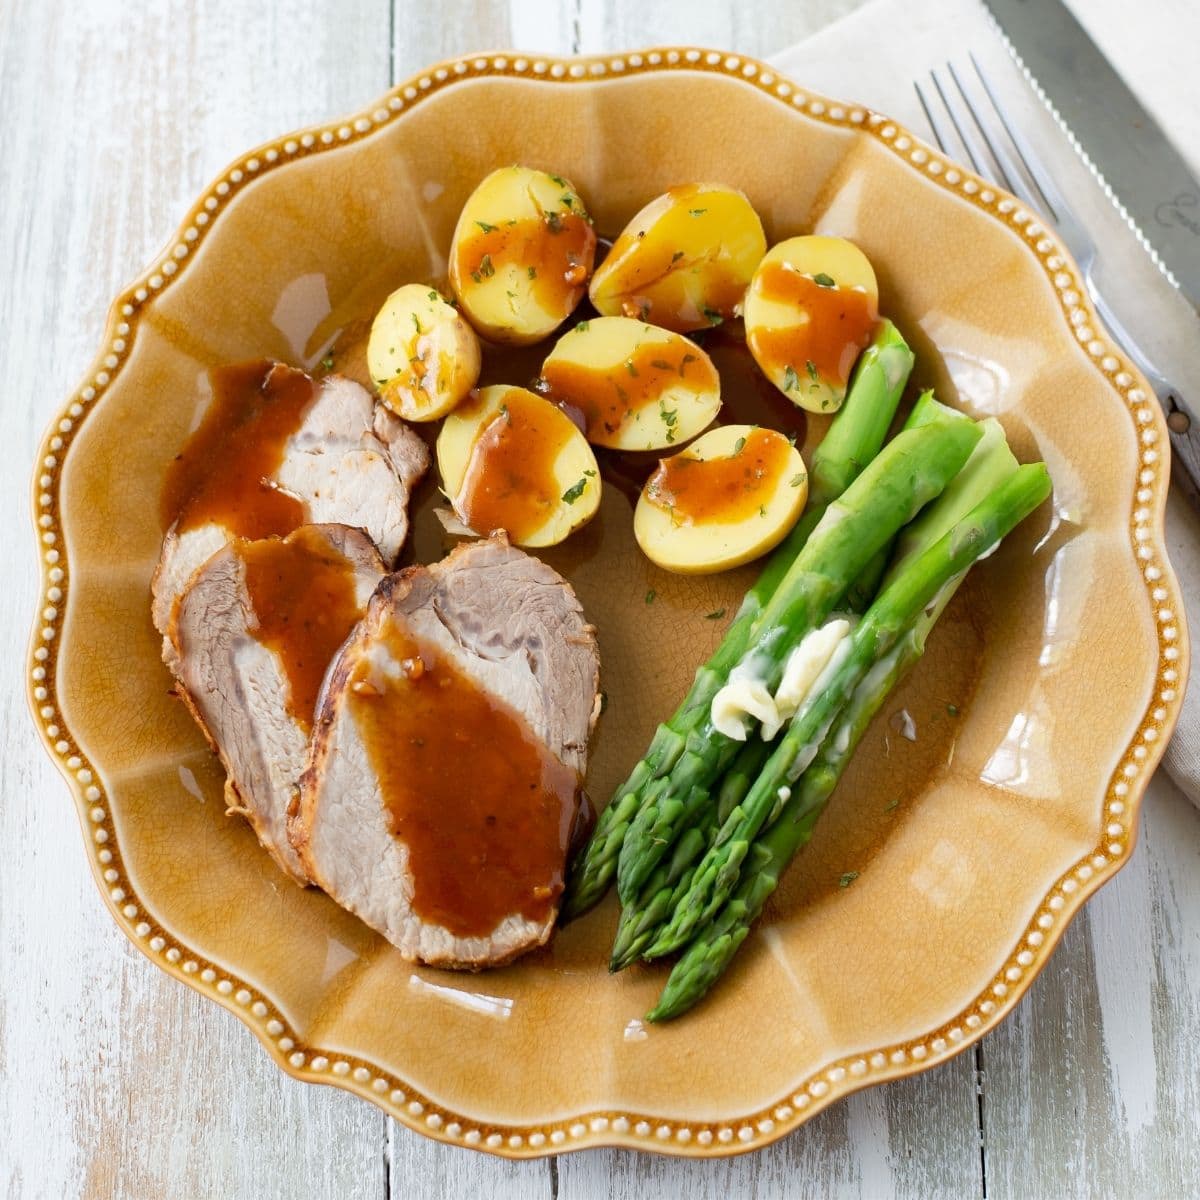 Honey garlic pork loin served on a dinner plate with potatoes and asparagus.